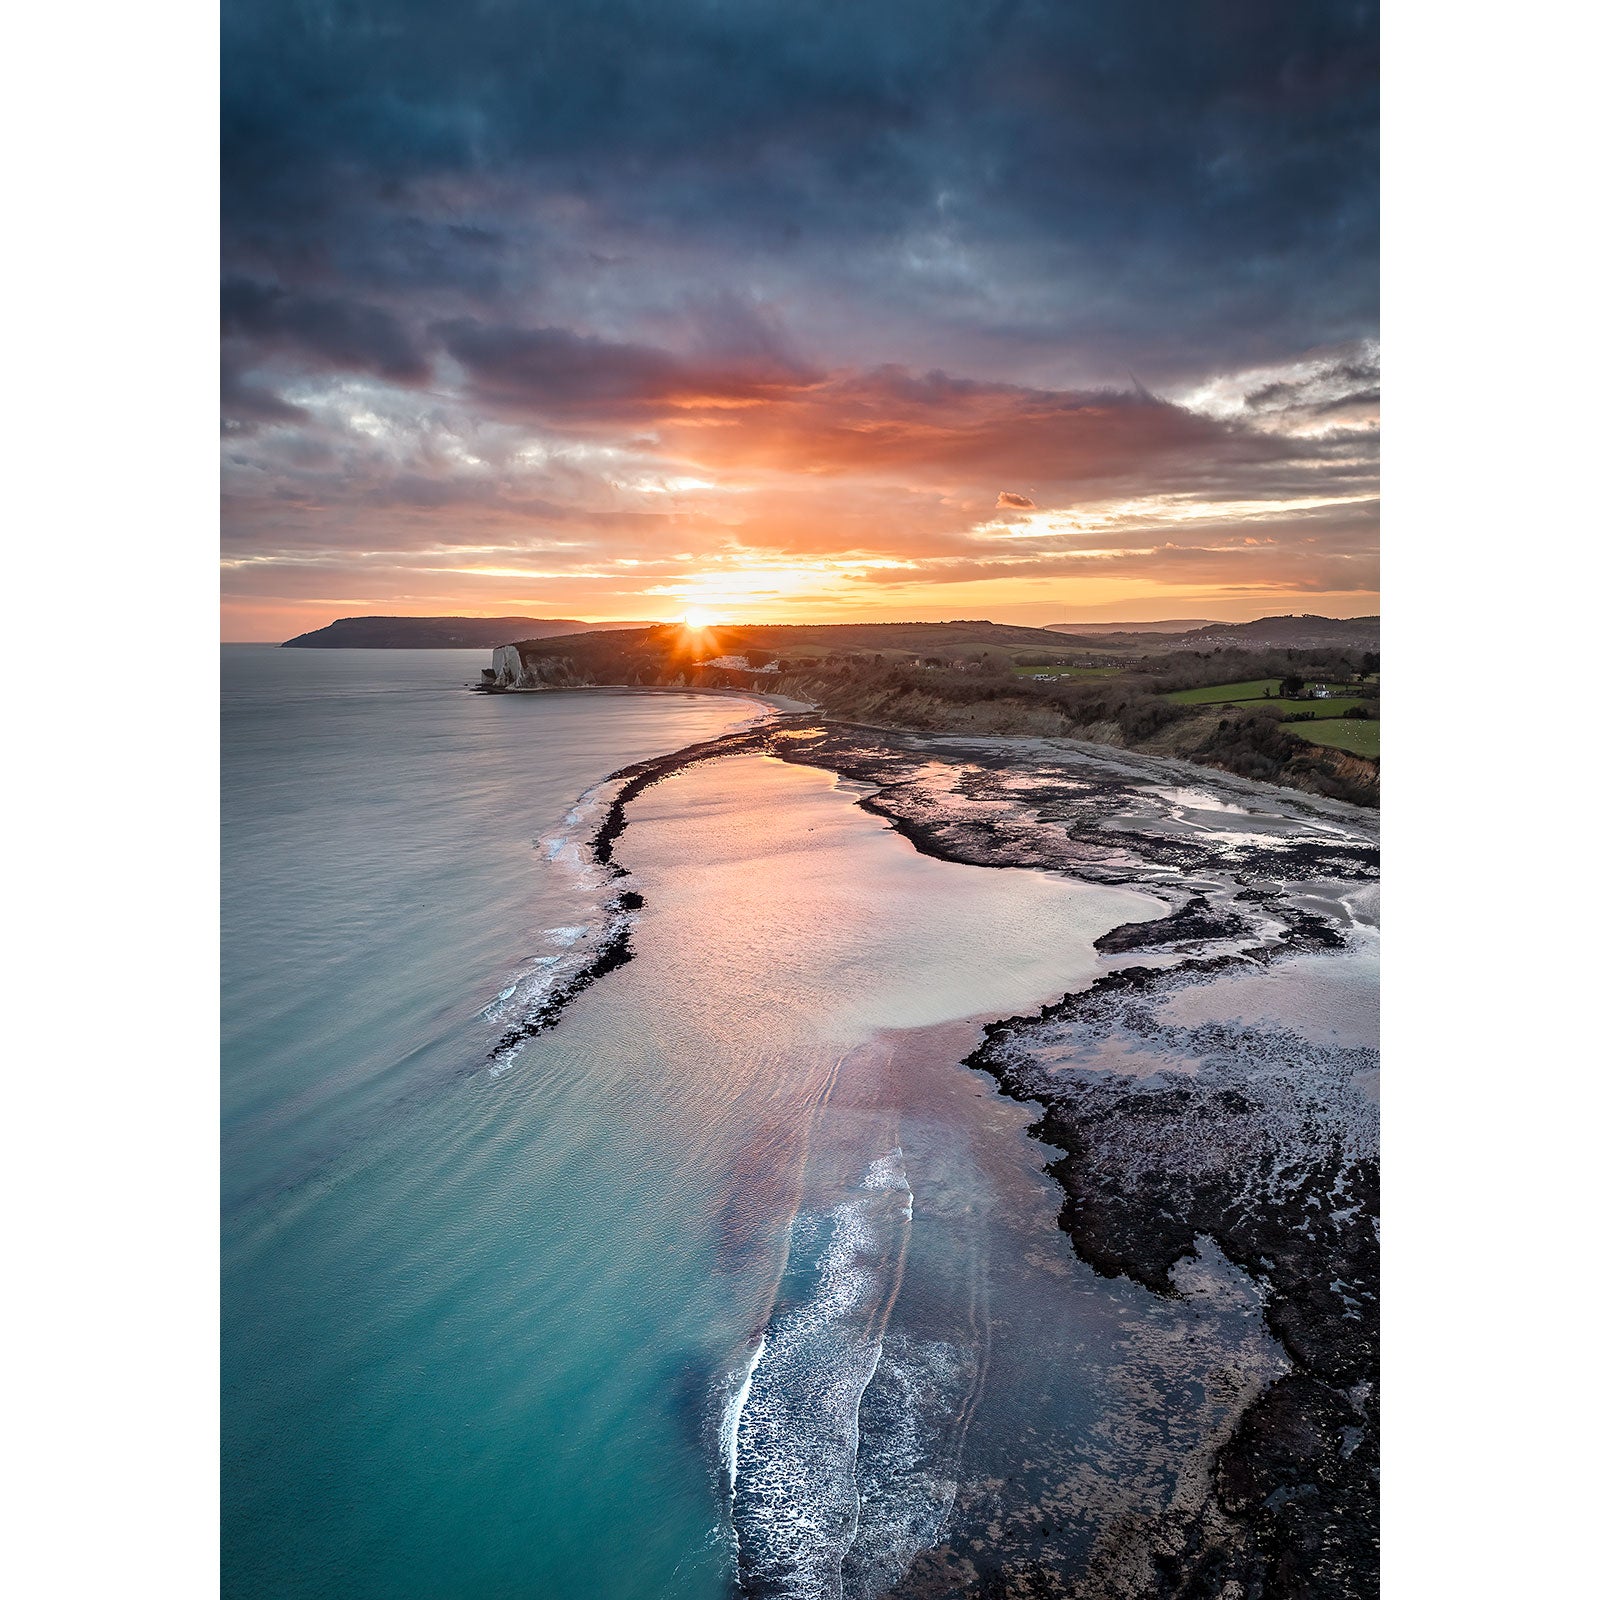 Sunset over a coastal landscape with a meandering river flowing into the sea near Whitecliff Bay by Available Light Photography.